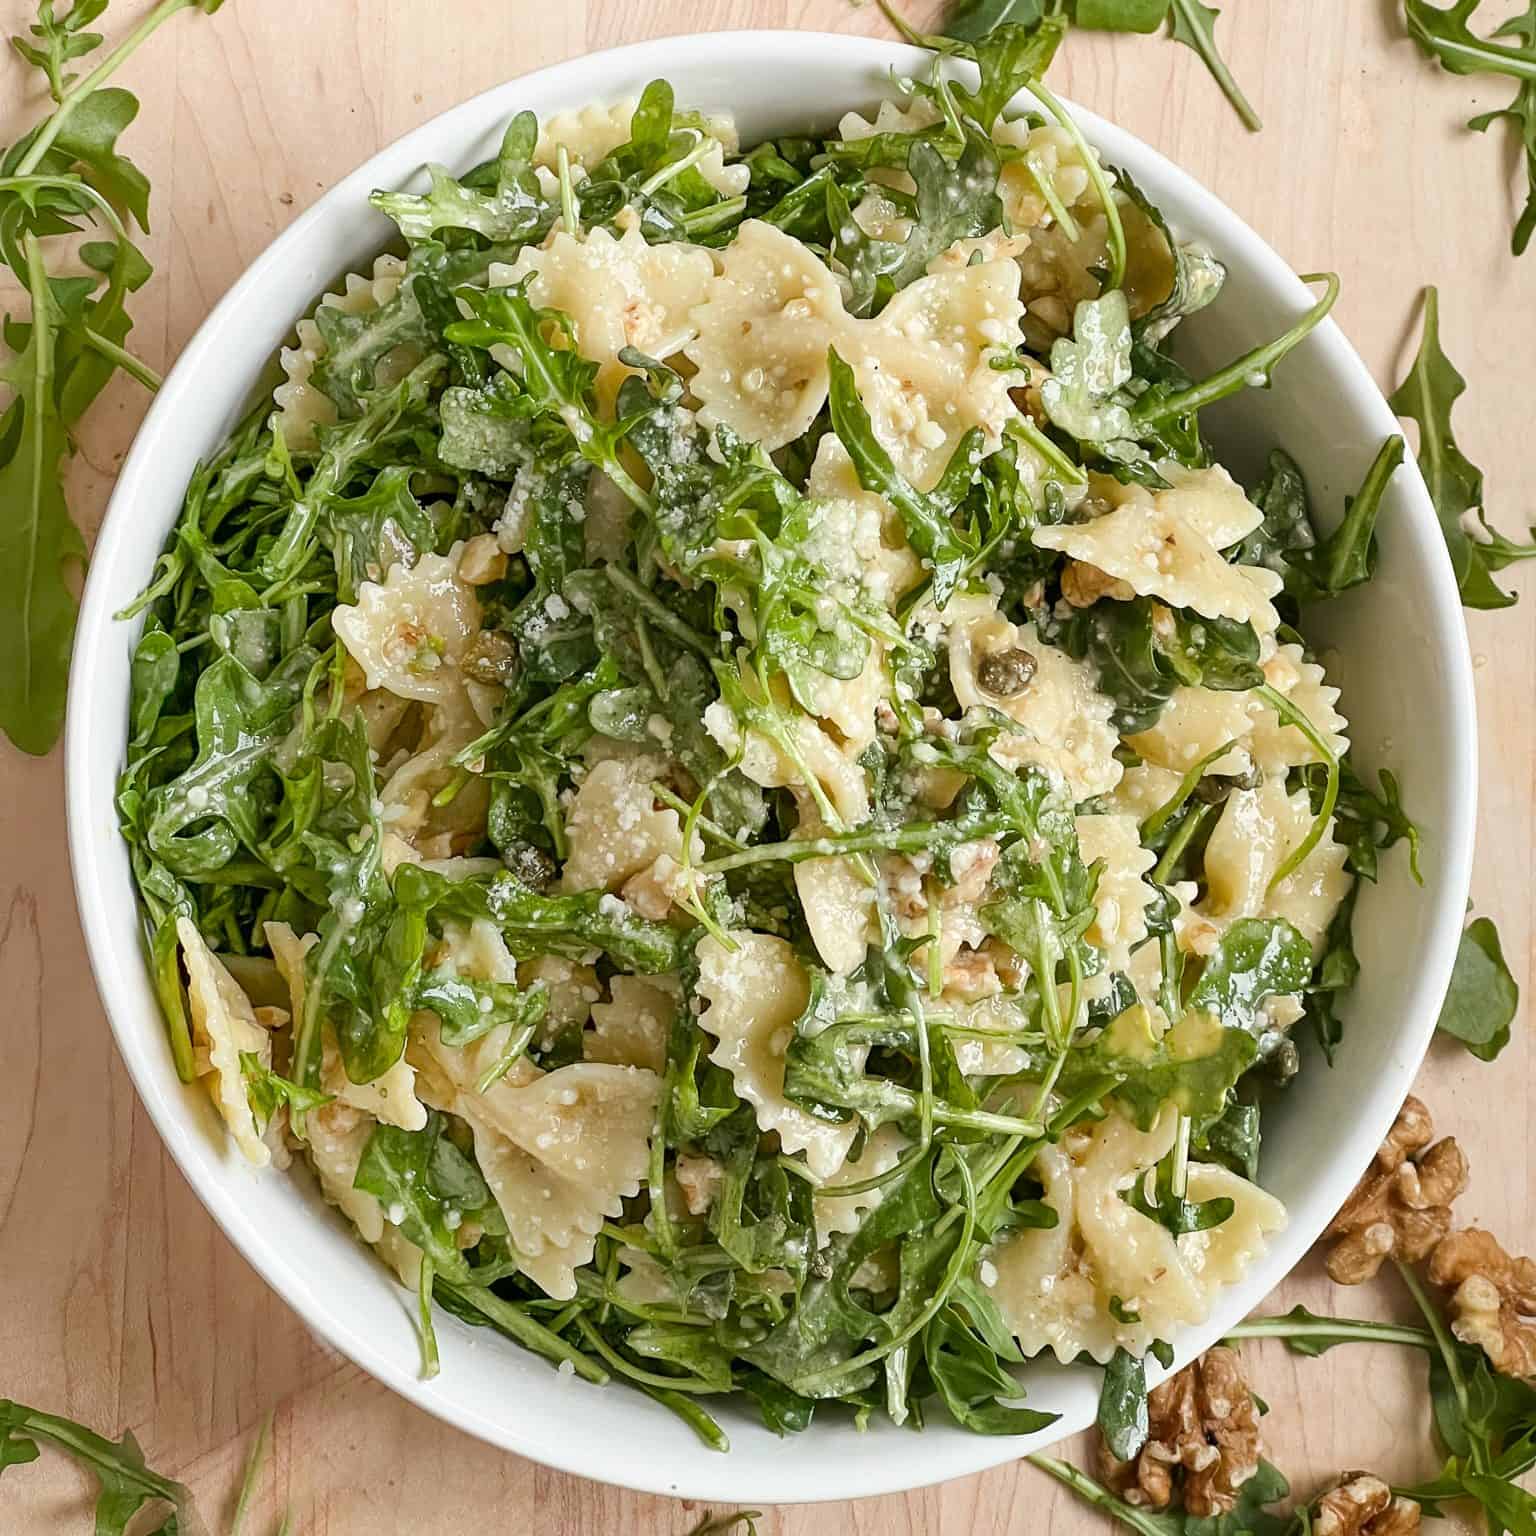 Lemon arugula pasta salad in white round bowl. Image from above, featured image